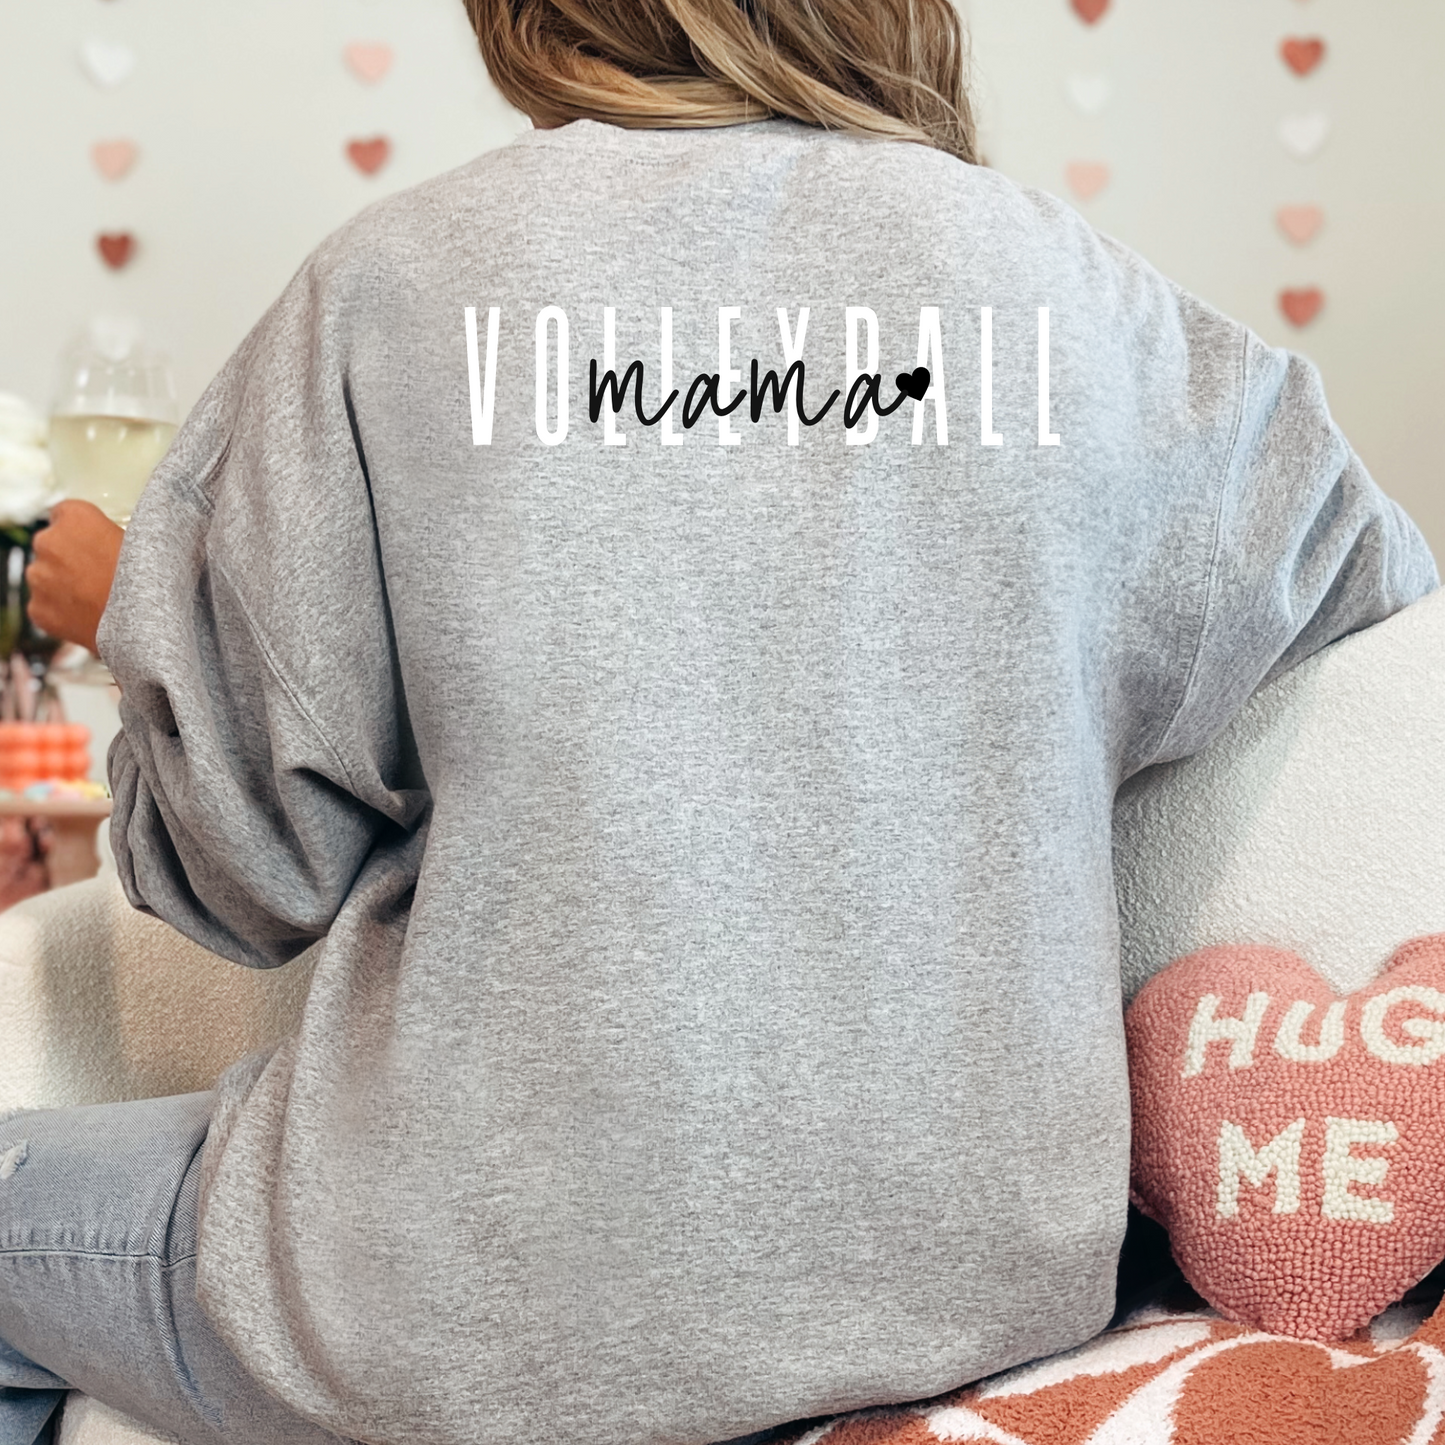 (Shirt not included) VOLLEYBALL Mom - Clear Film Transfer